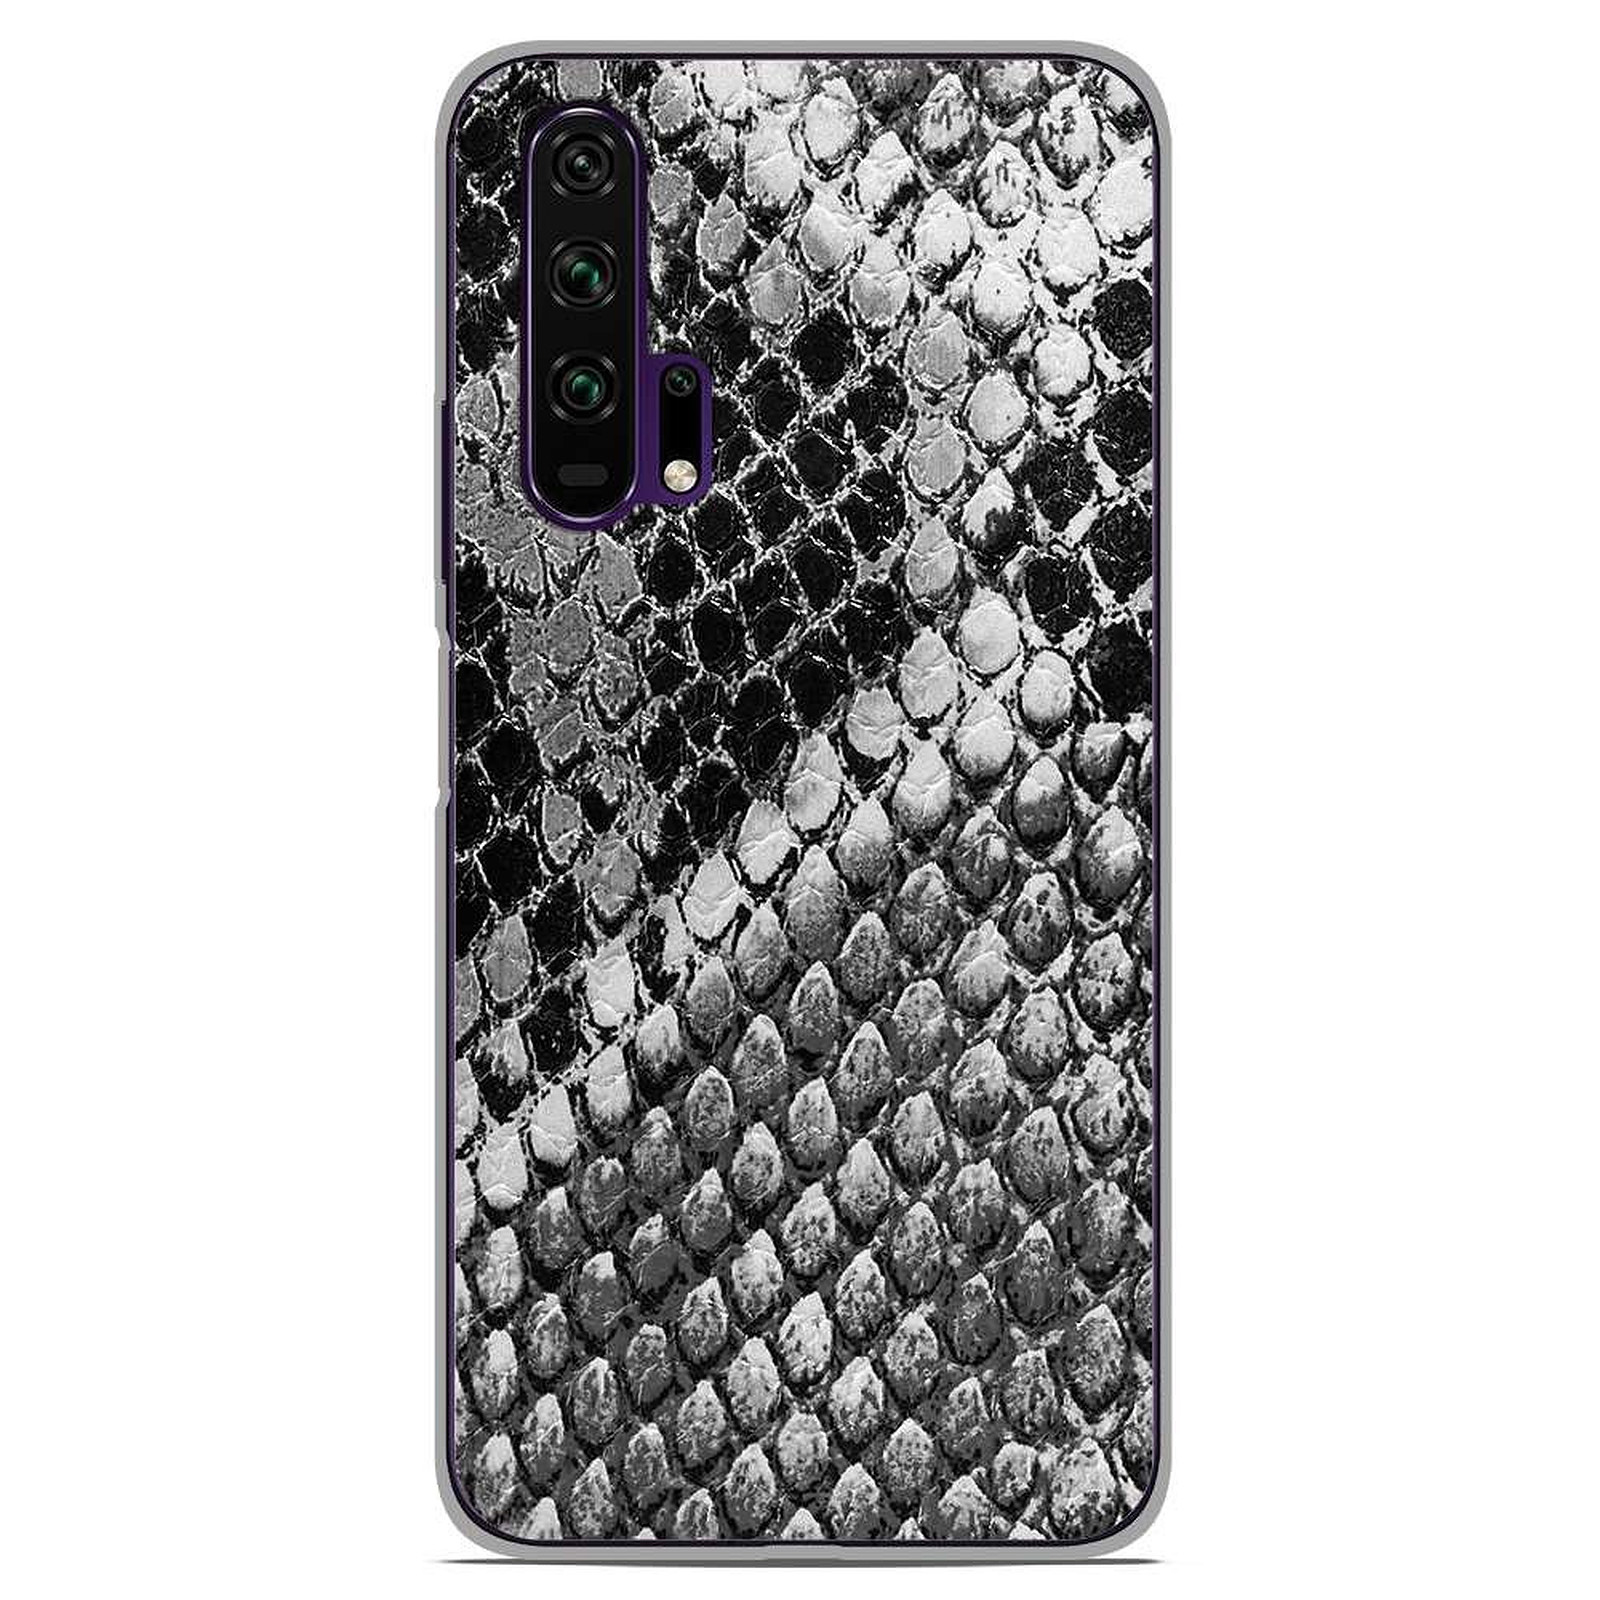 1001 Coques Coque silicone gel Huawei Honor 20 Pro motif Texture Python - Coque telephone 1001Coques